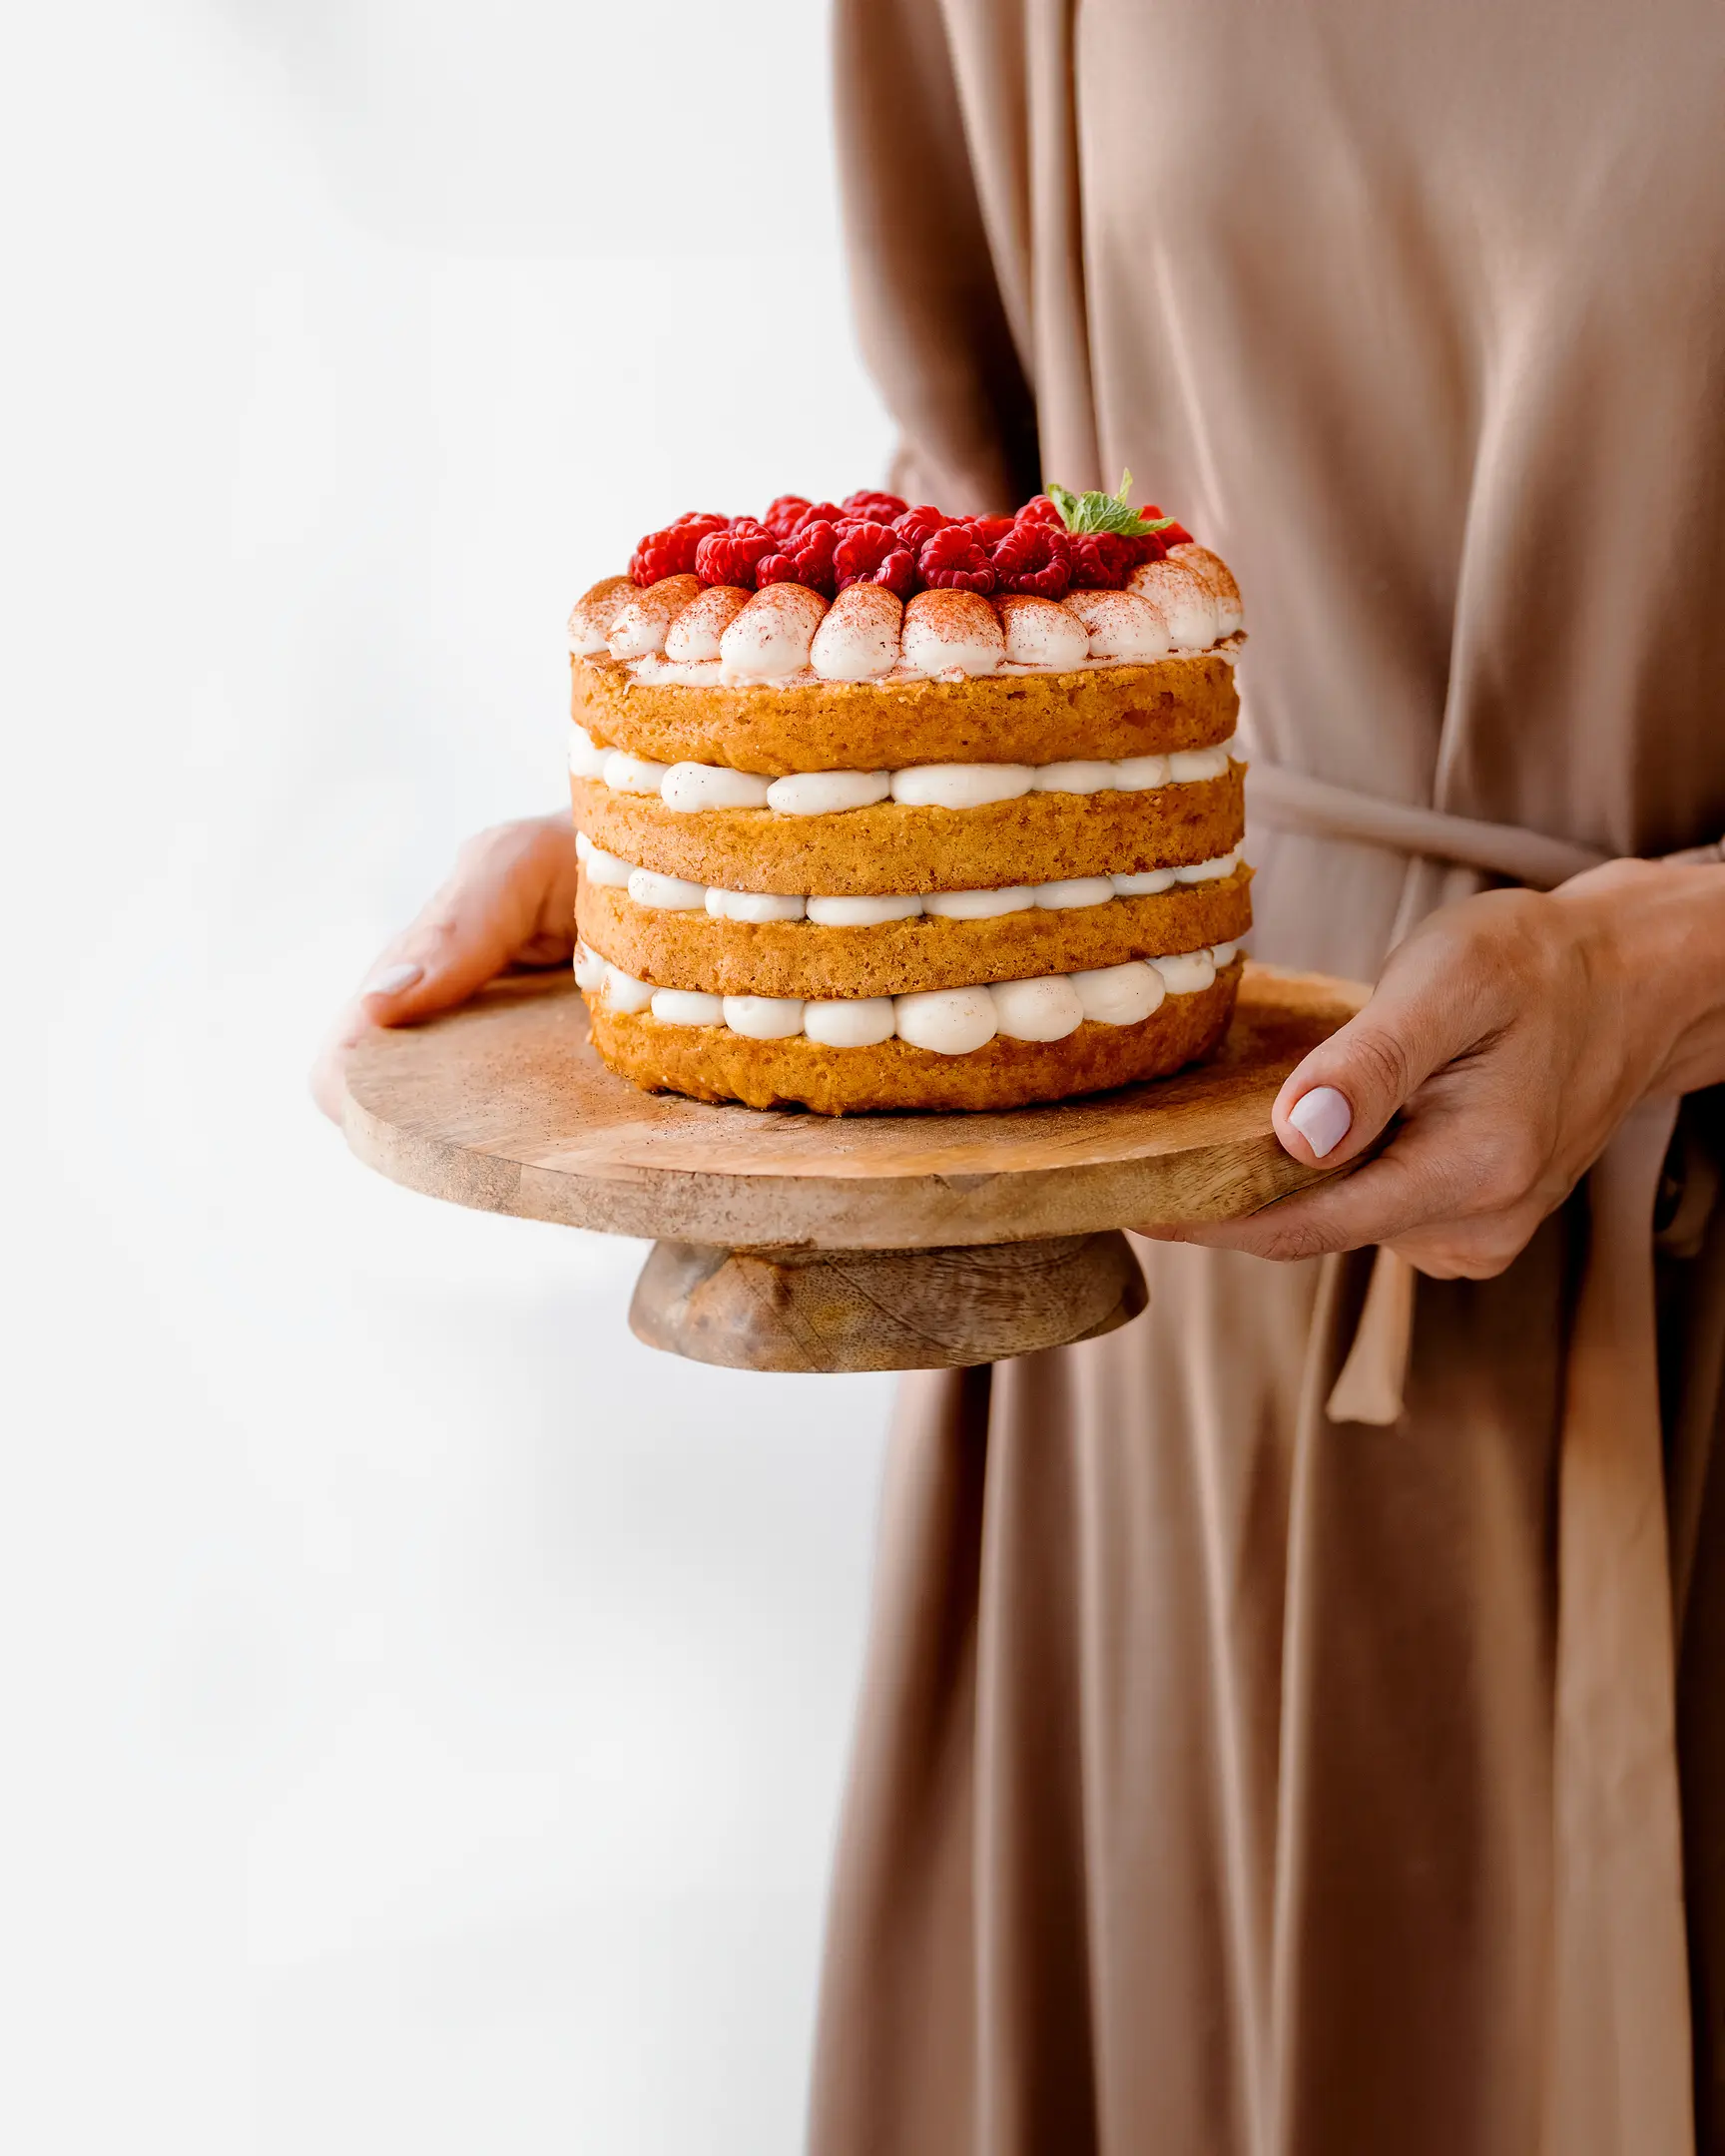 A woman holding plate with cake in her hands. A woman holding a plate with cake in her hands. Cake decorated with strawberries